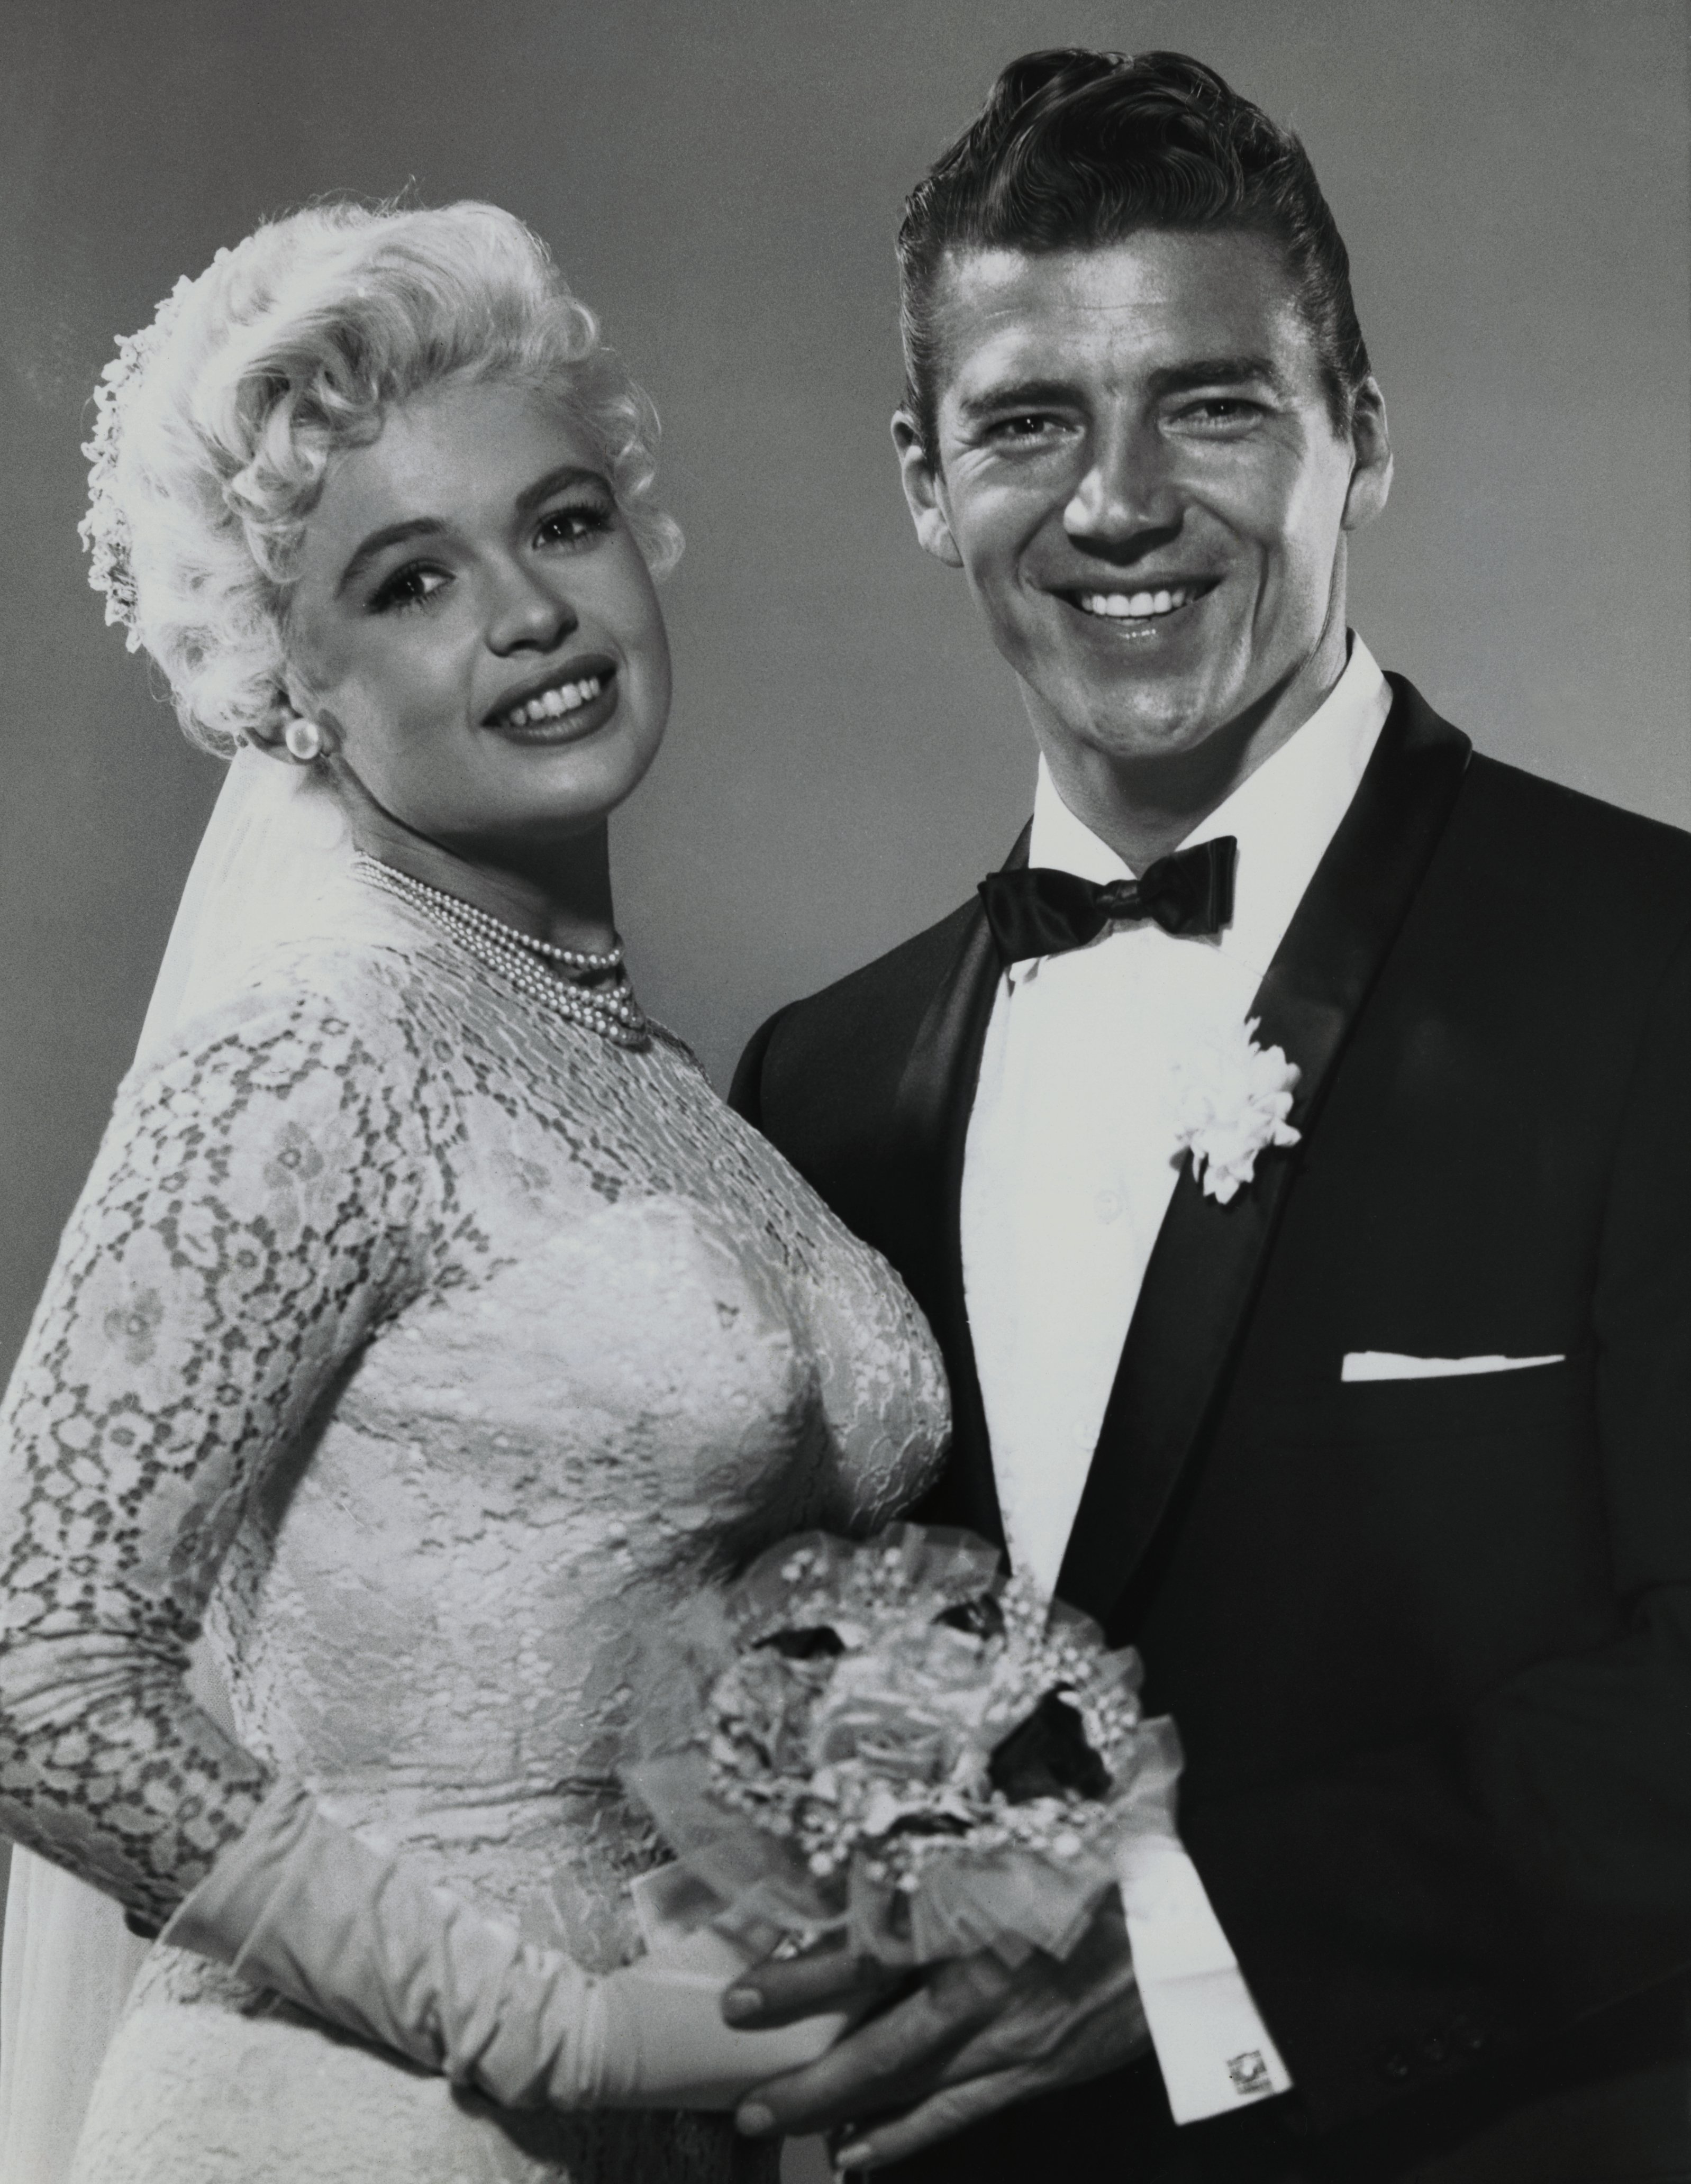 Jayne Mansfield and Mickey Hargitay in their wedding attire before their ceremony at Palos Verdes, California on January 10, 1958 | Source: Getty Images